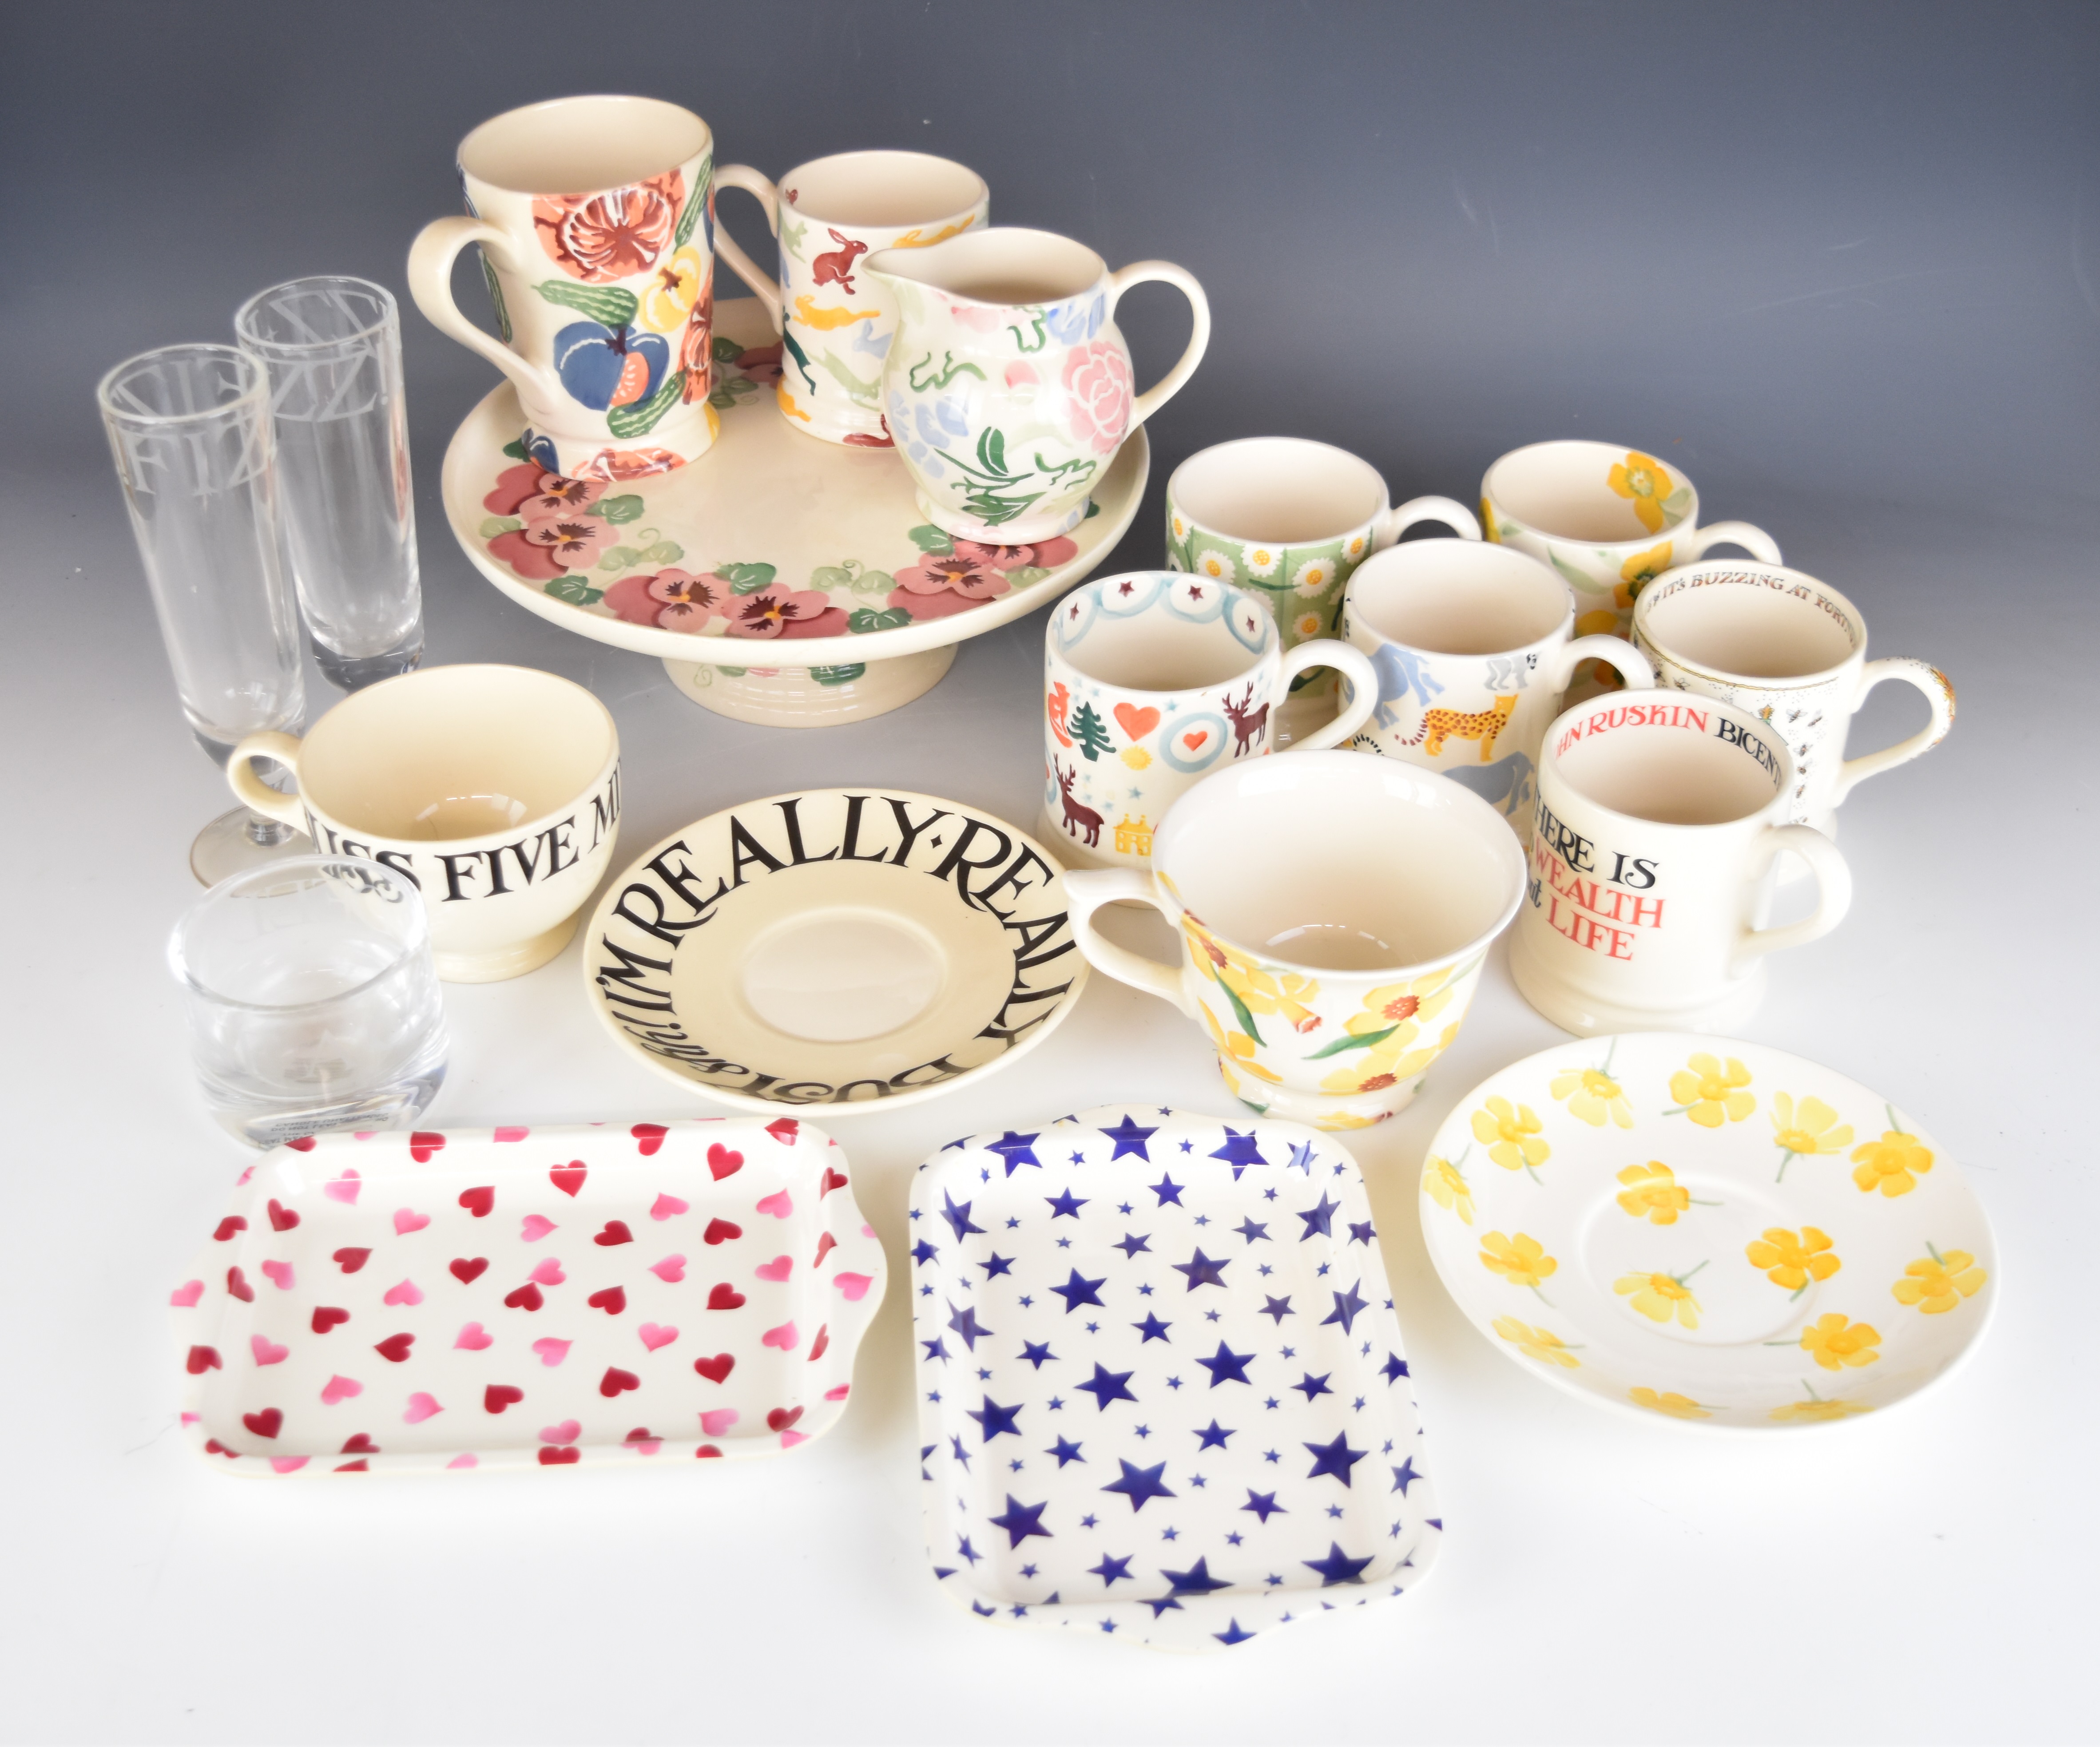 Emma Bridgewater ceramics including a tazza with pansy decoration, mugs, cups and saucers, glasses